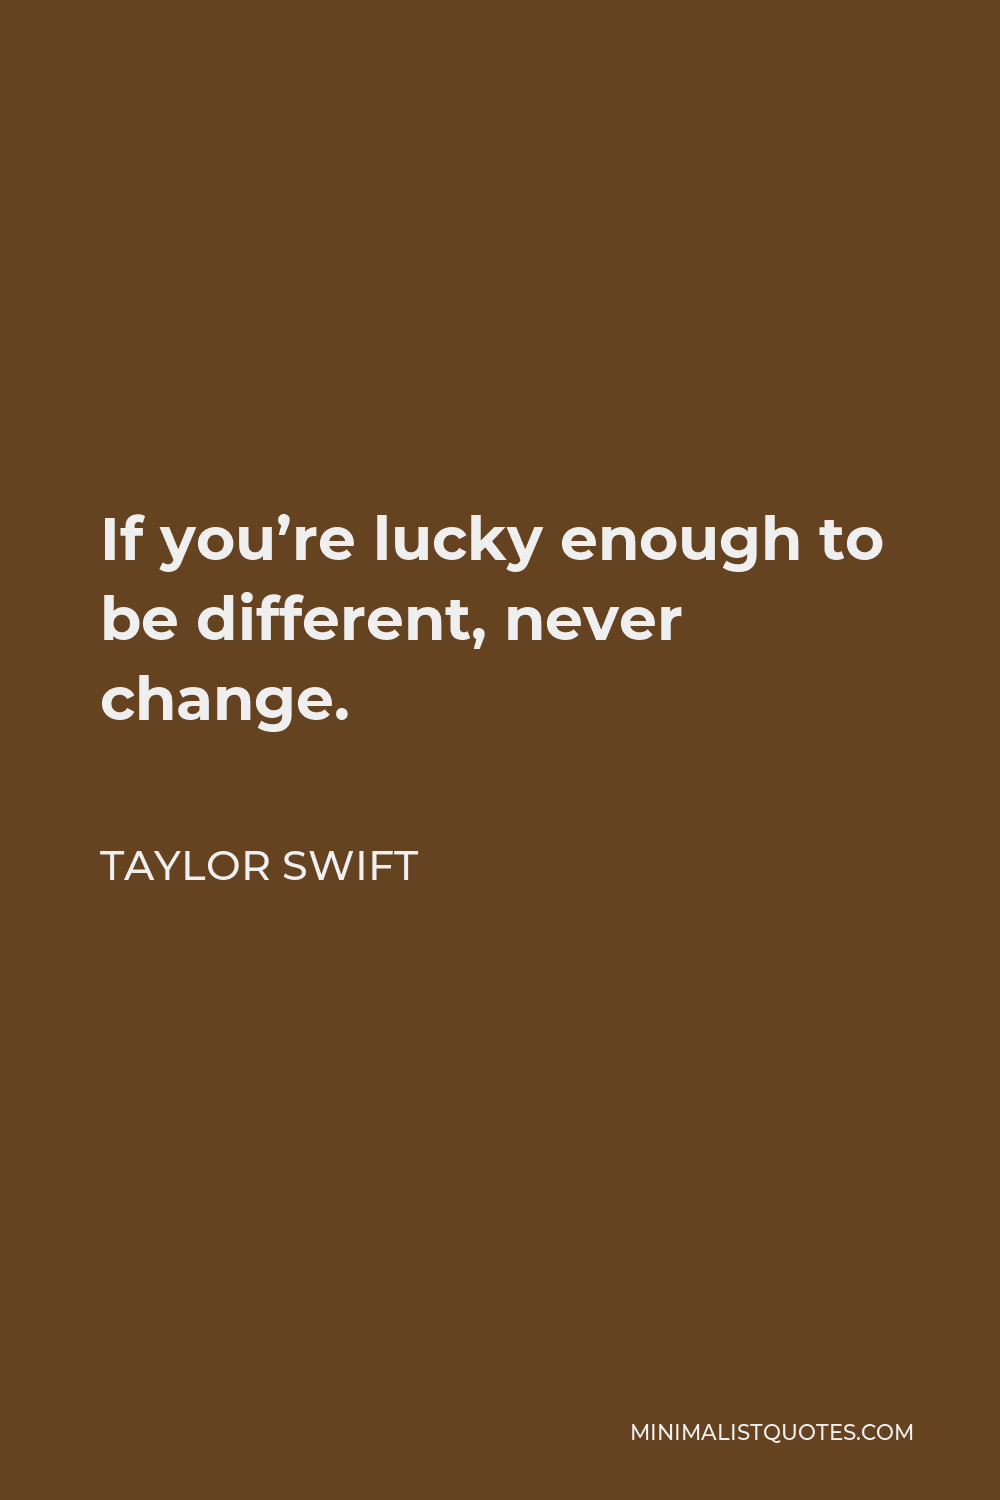 Taylor Swift Quote: If you're lucky enough to be different, never change.